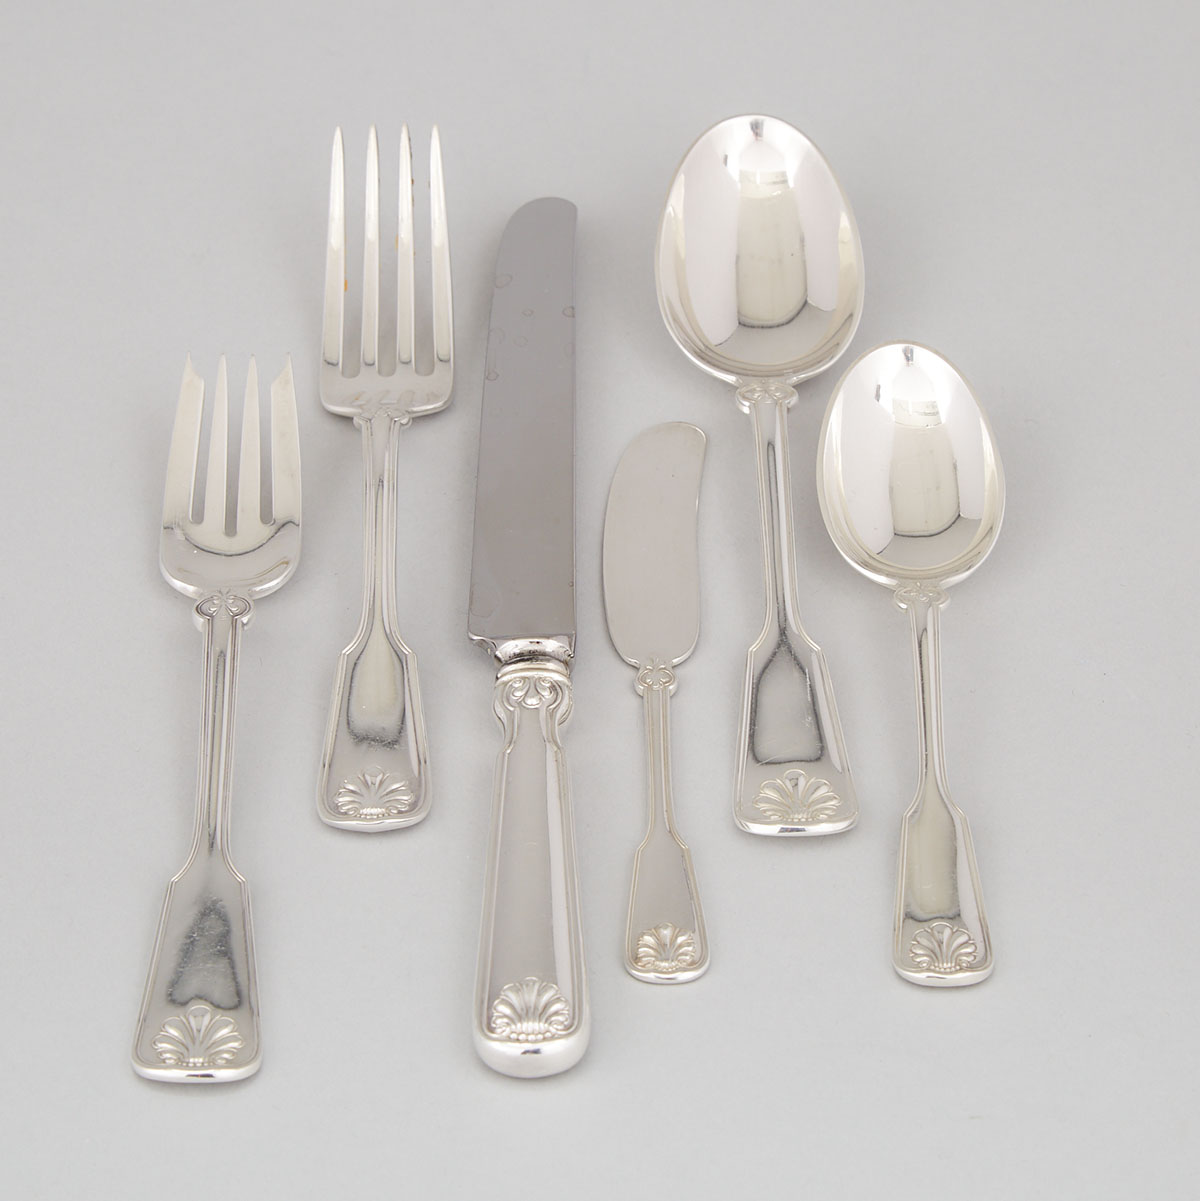 American Silver 'Shell and Thread' Pattern Flatware Service, Tiffany & Co., New York, N.Y., early 20th century